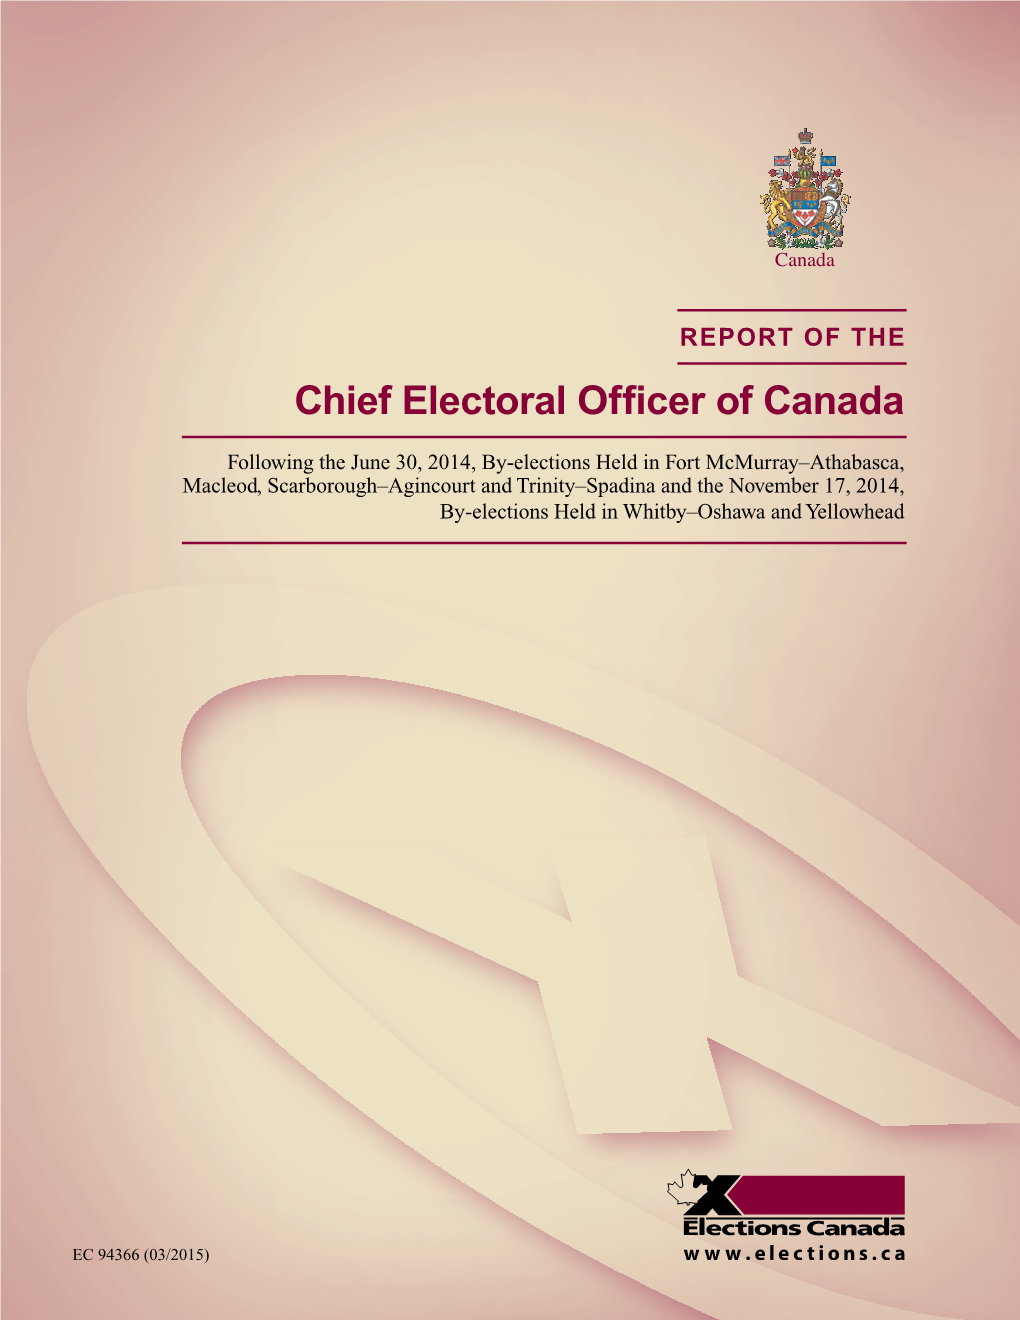 REPORT of the Chief Electoral Officer of Canada